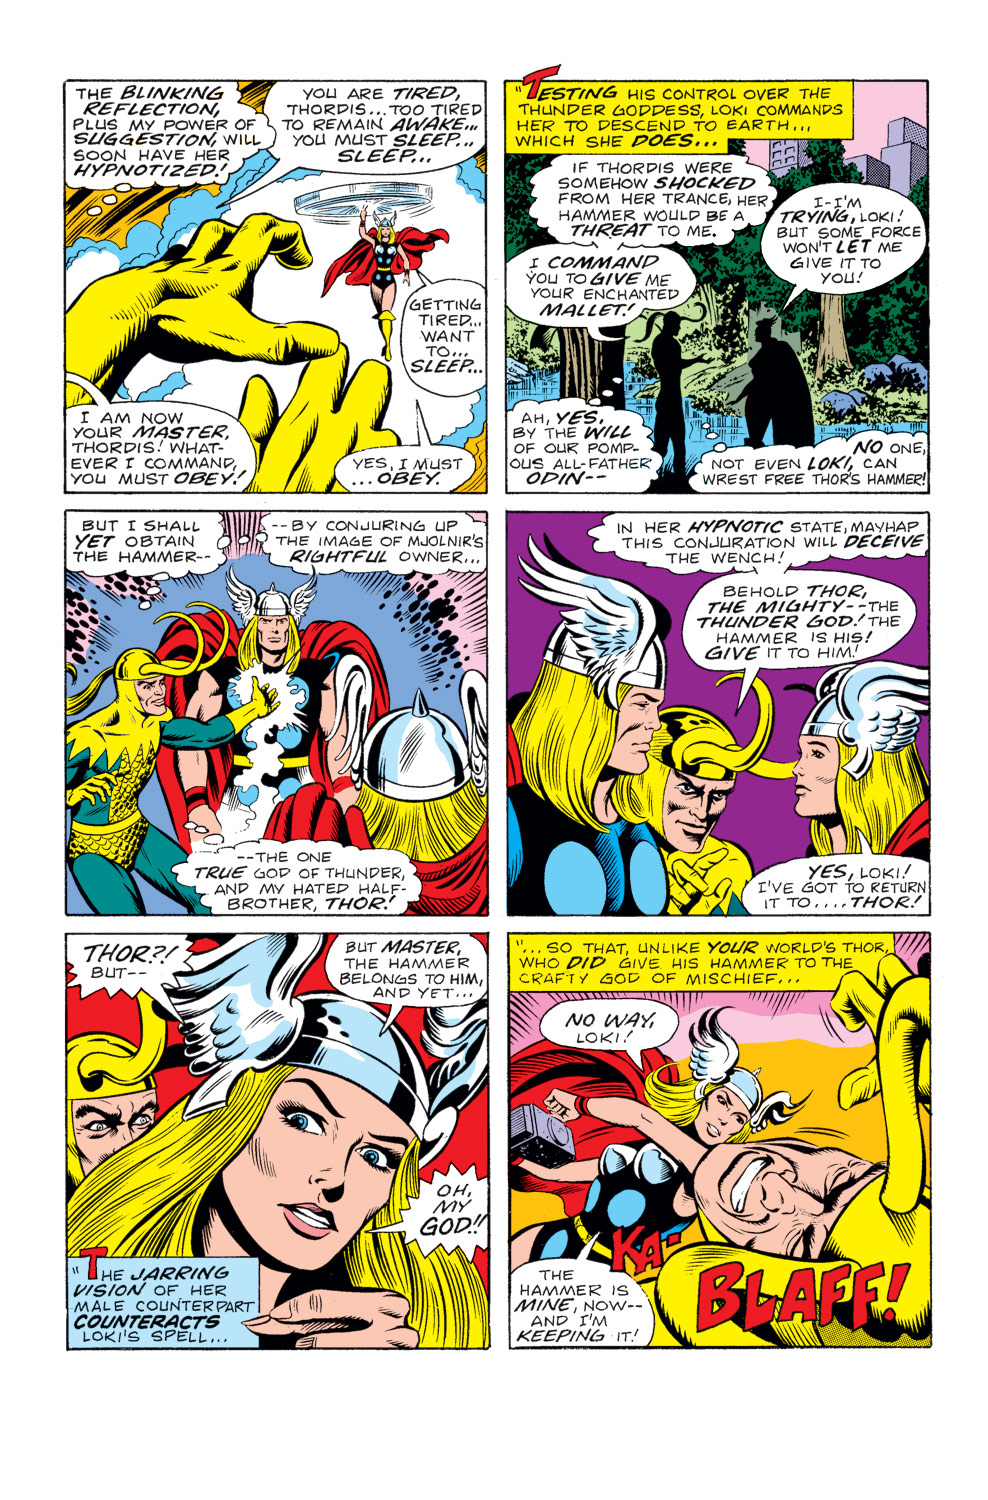 What If? (1977) issue 10 - Jane Foster had found the hammer of Thor - Page 15